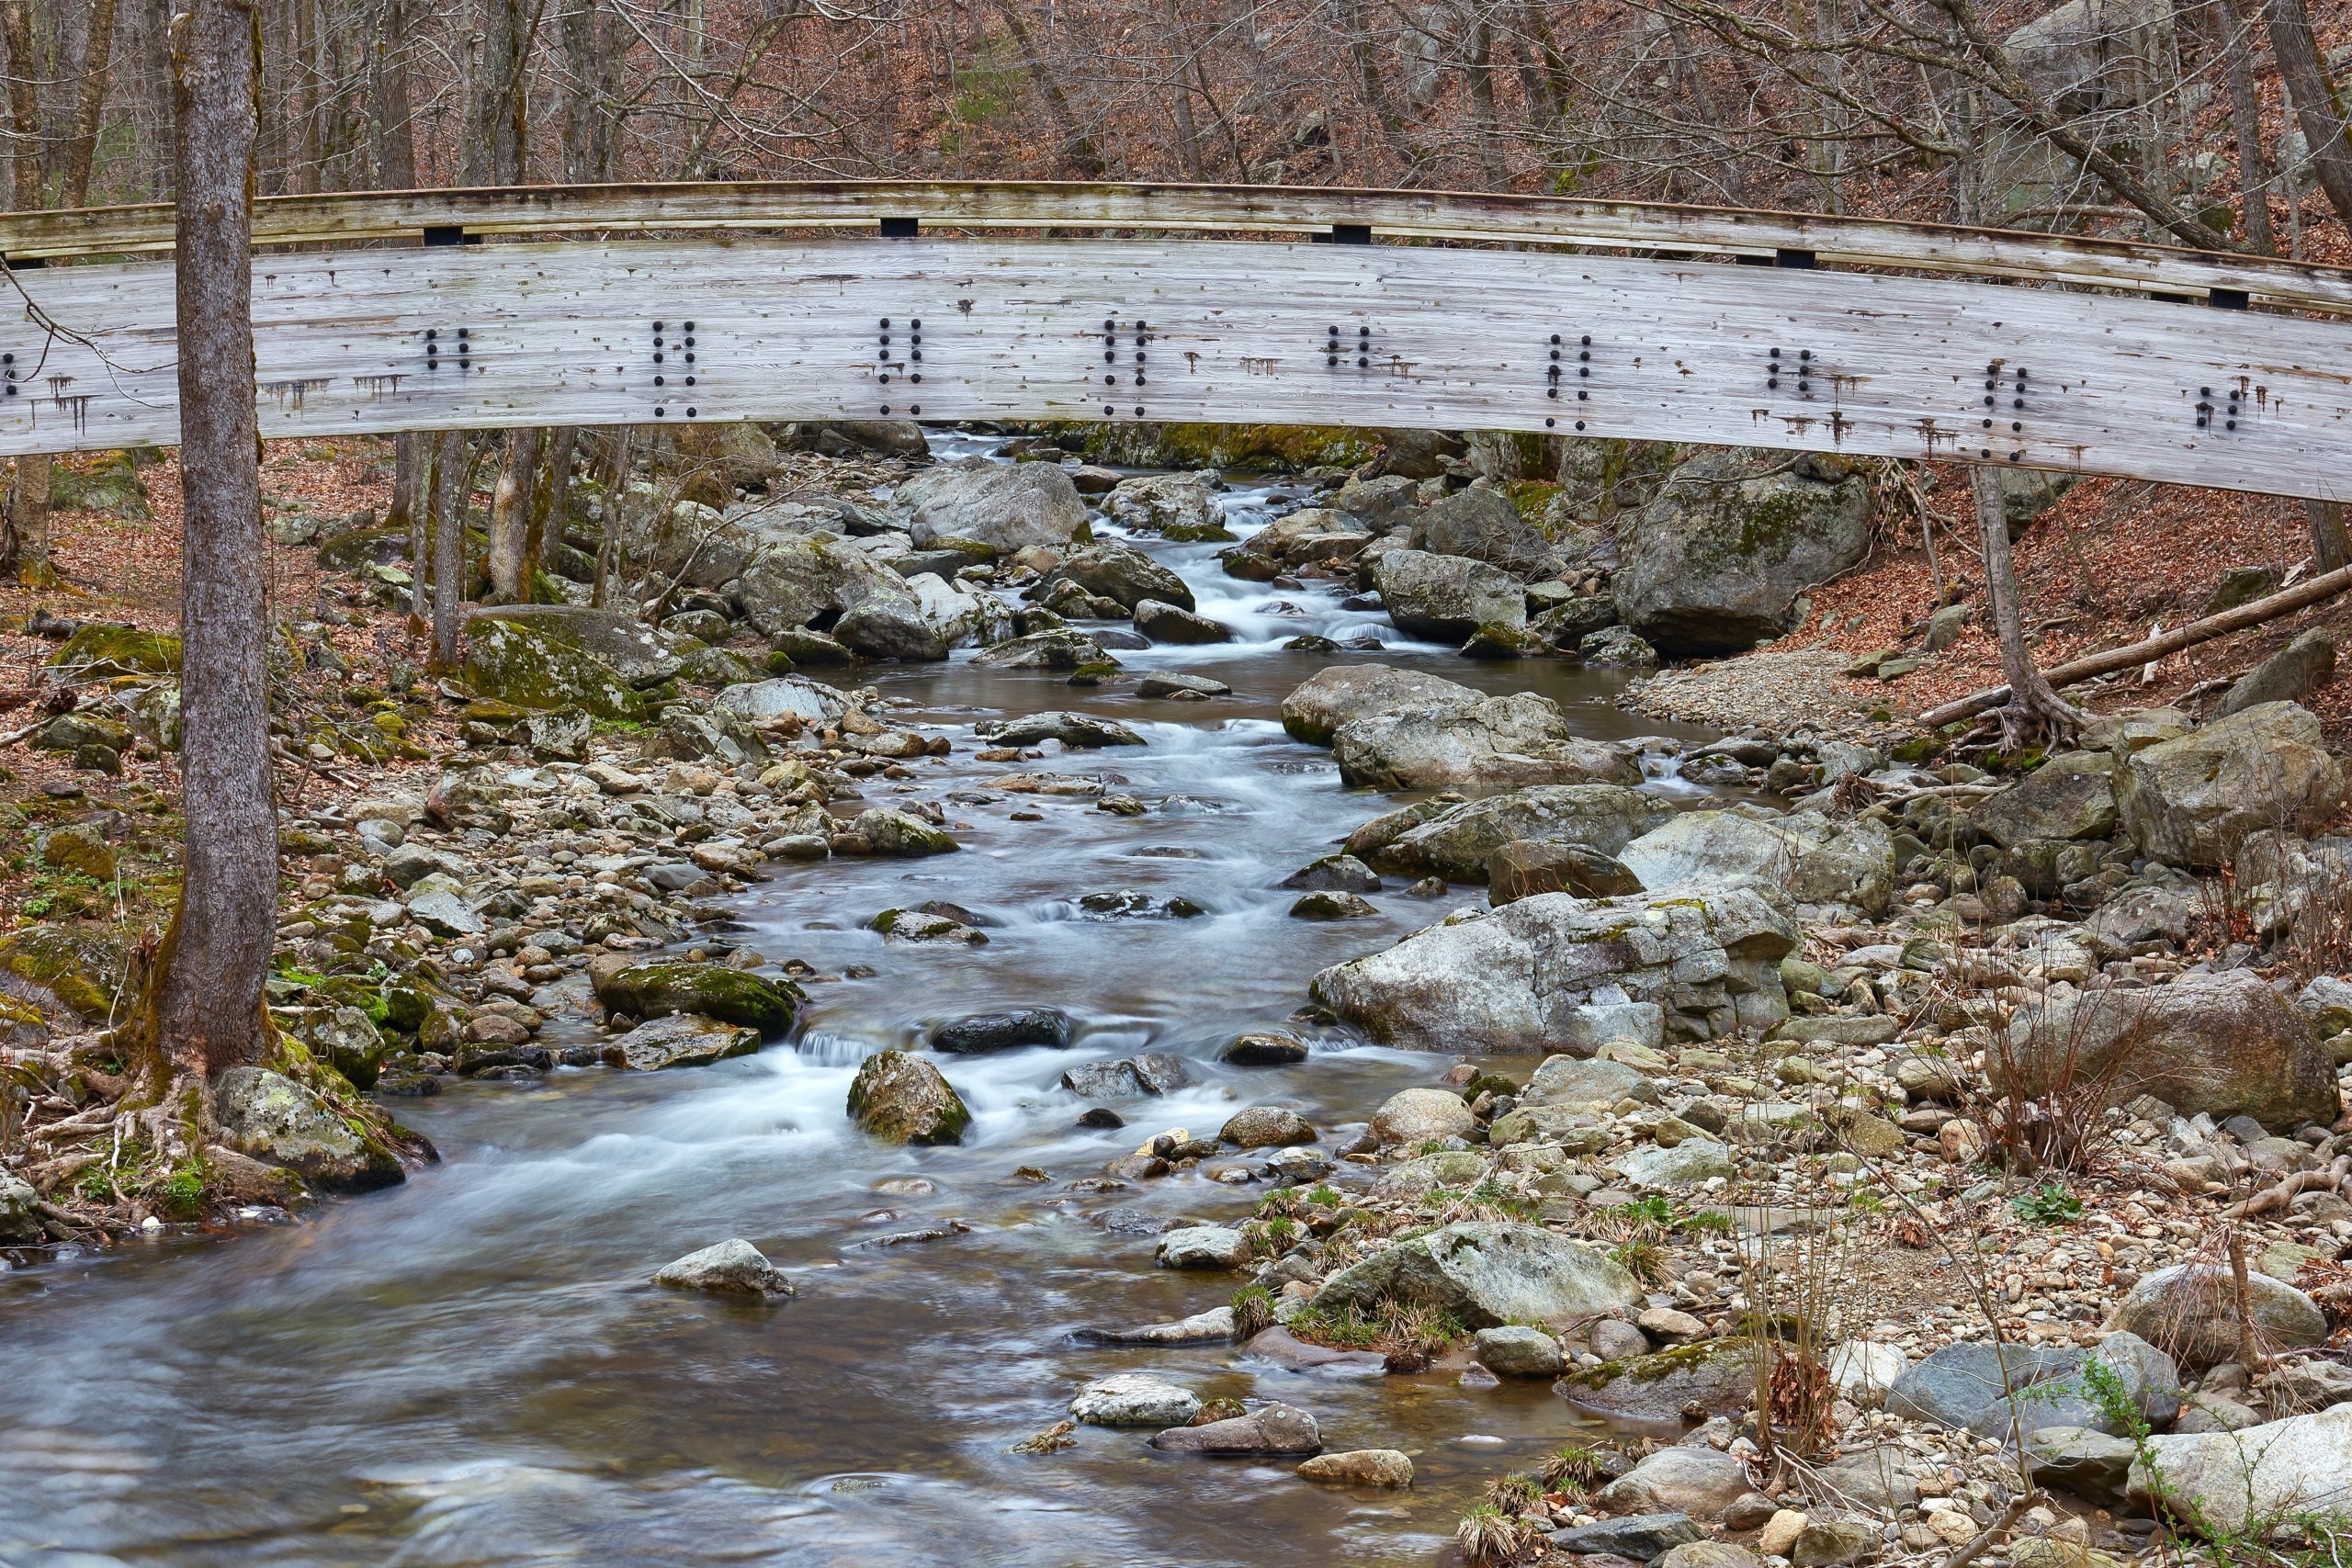 View of the Tye River and a footbridge at Crabtree Falls Recreation Area near Montebello, Virginia